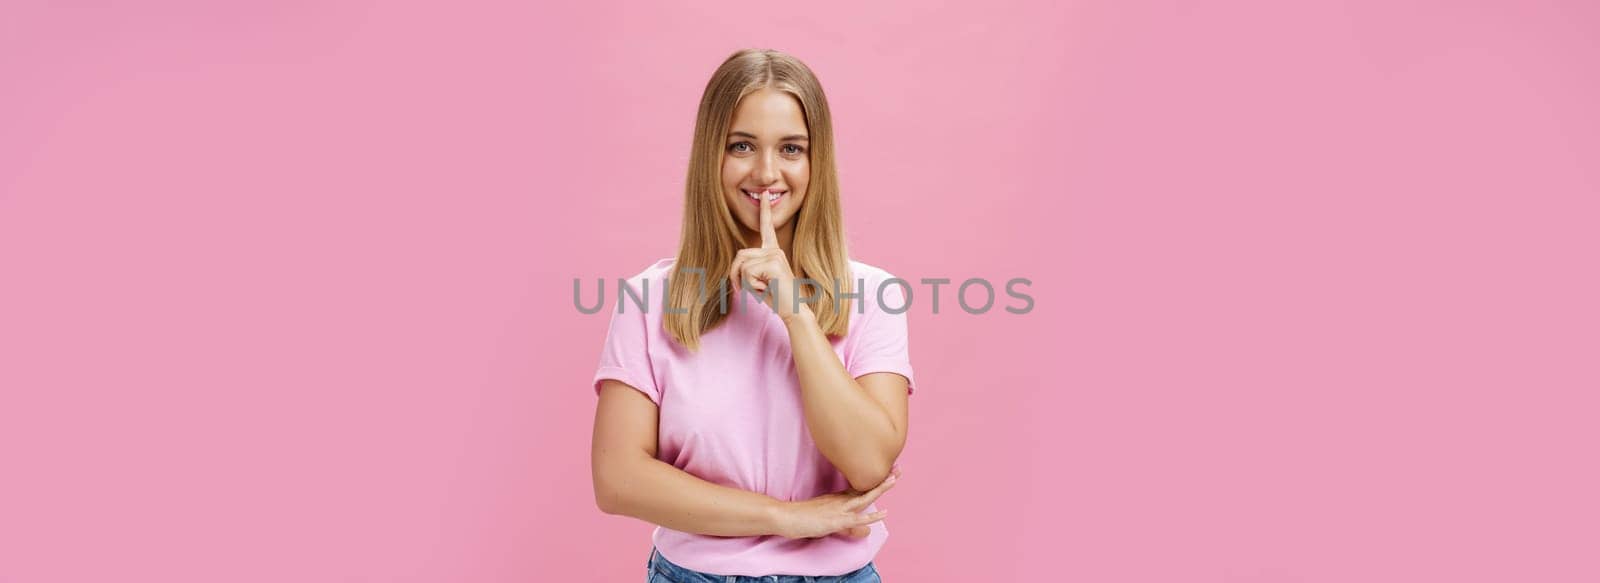 Shh keep it secret. Portrait of charismatic cheerful chubby girl with tanned skin and fair hair showing shush gesture with index finger over mouth smiling hiding surprise posing over pink background.